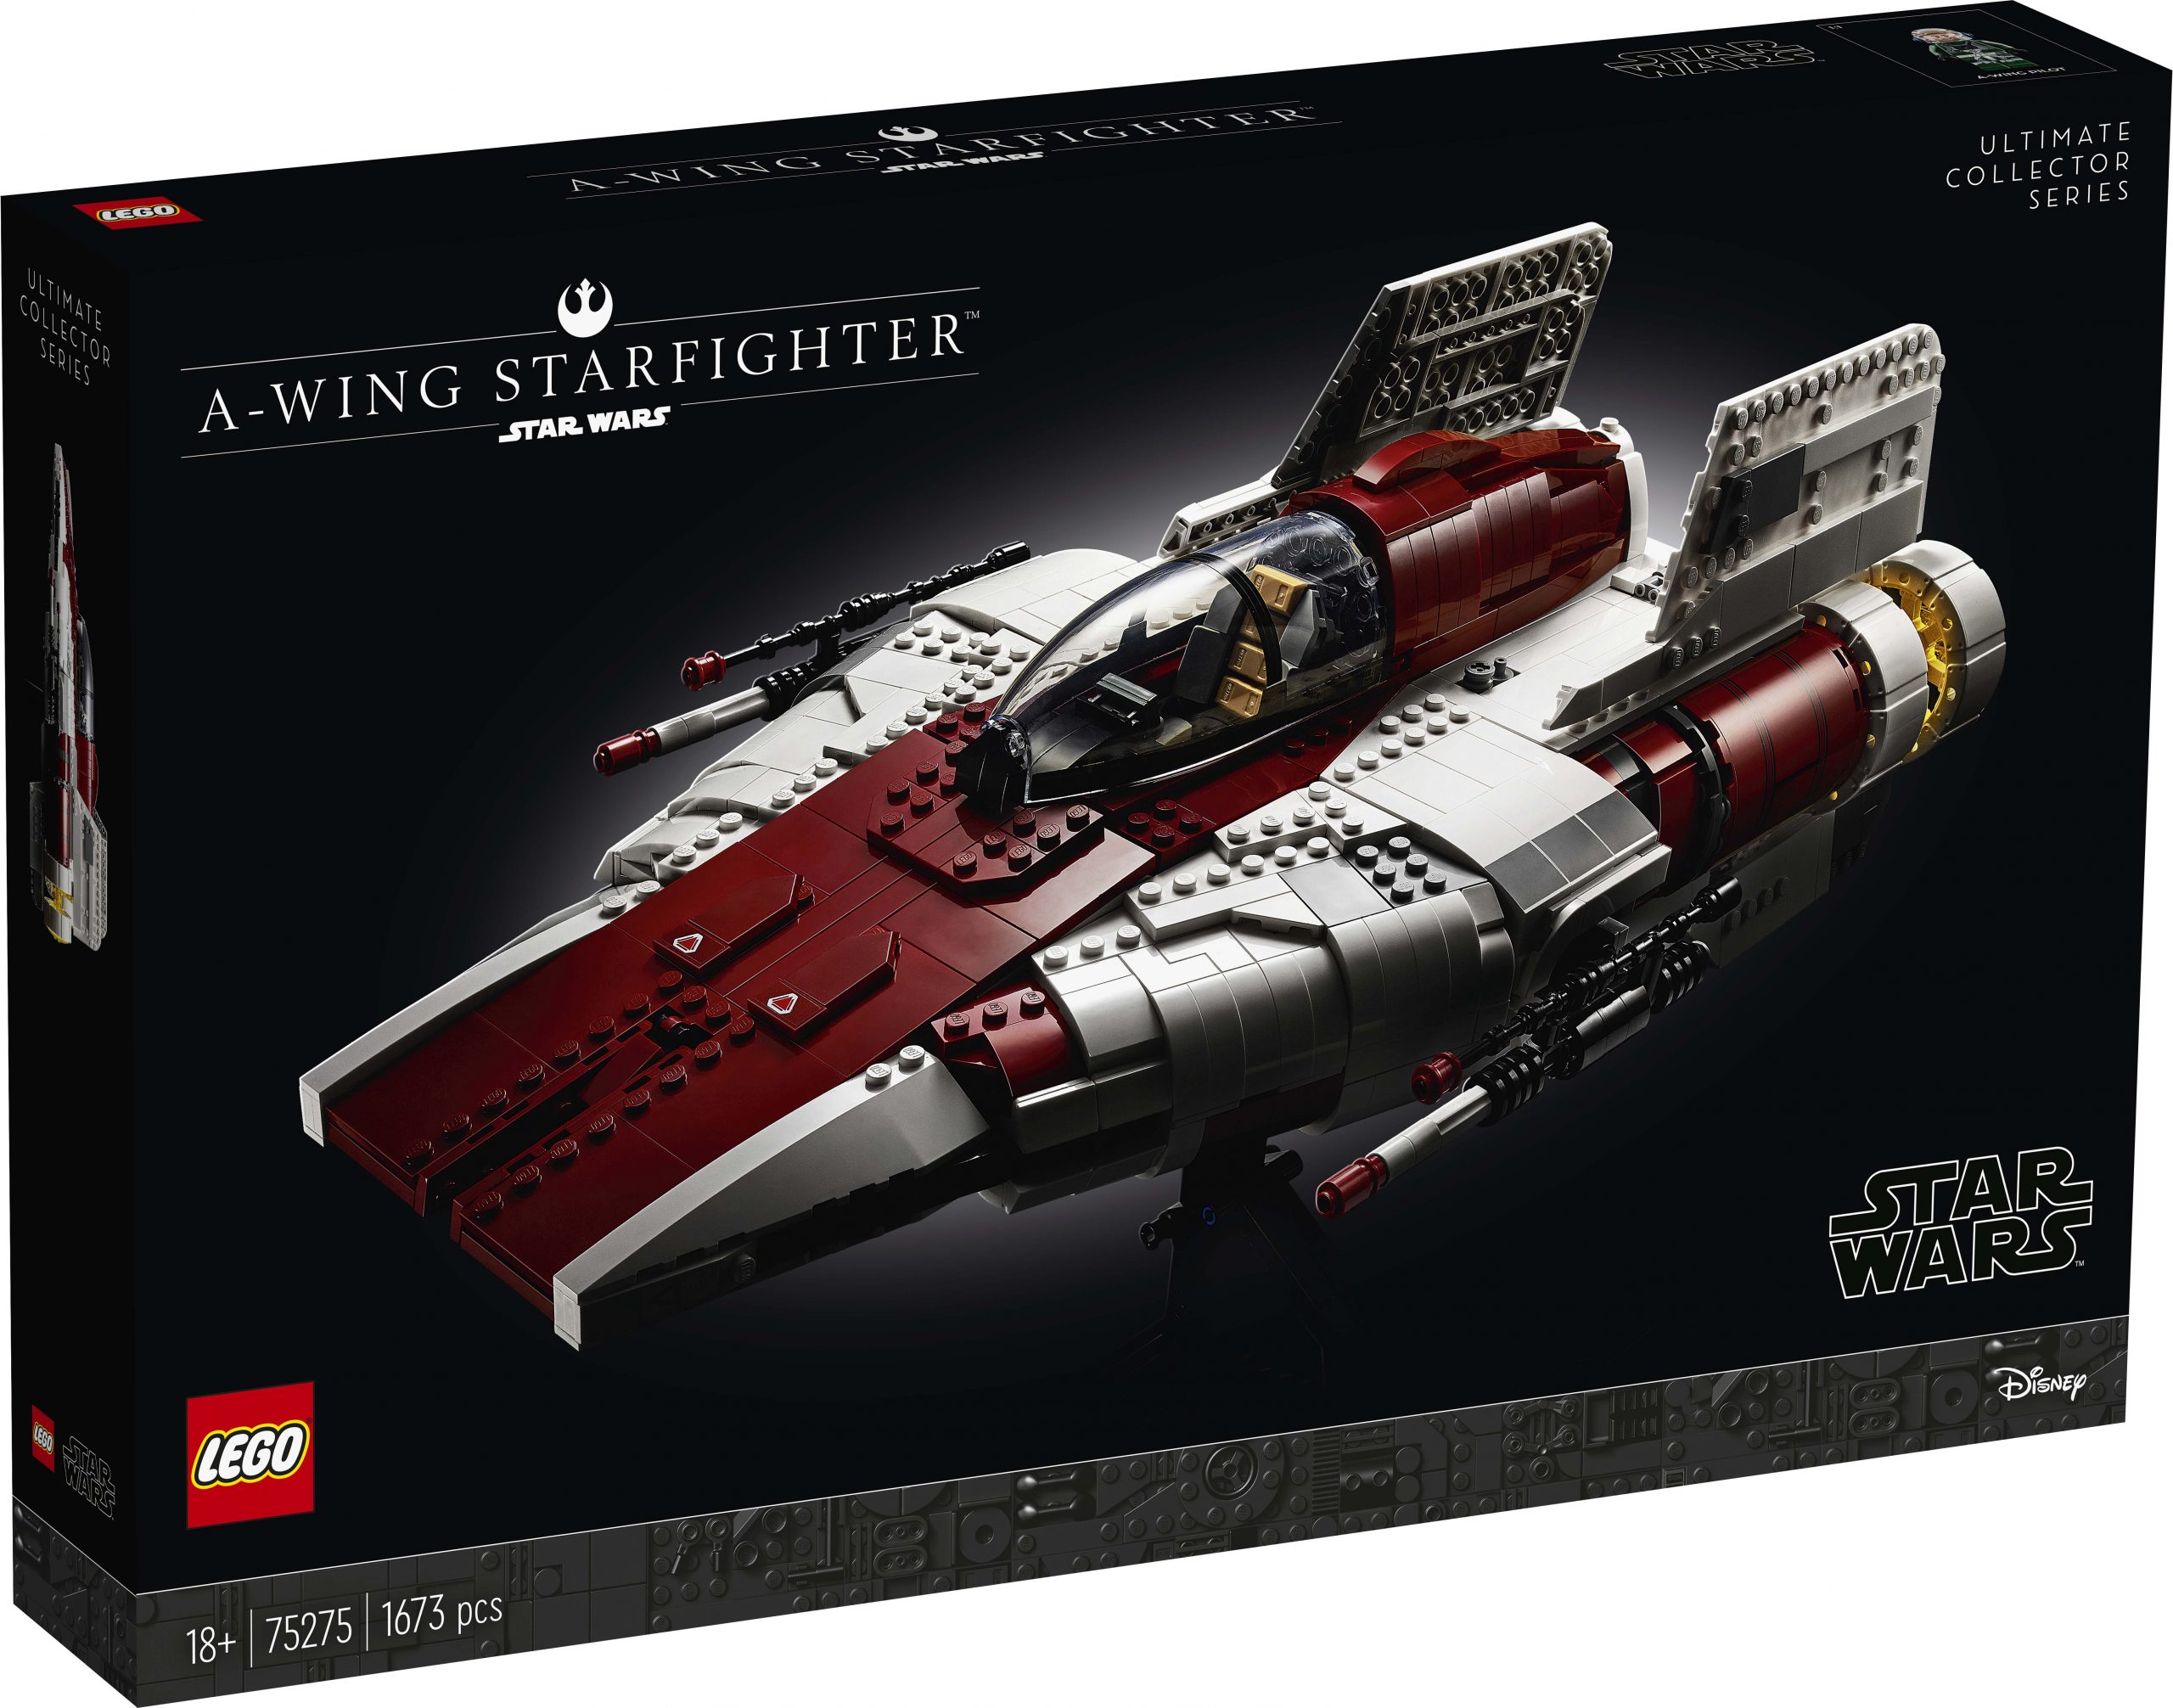 LEGO Star Wars UCS A-wing Starfighter (75275) Officially Announced